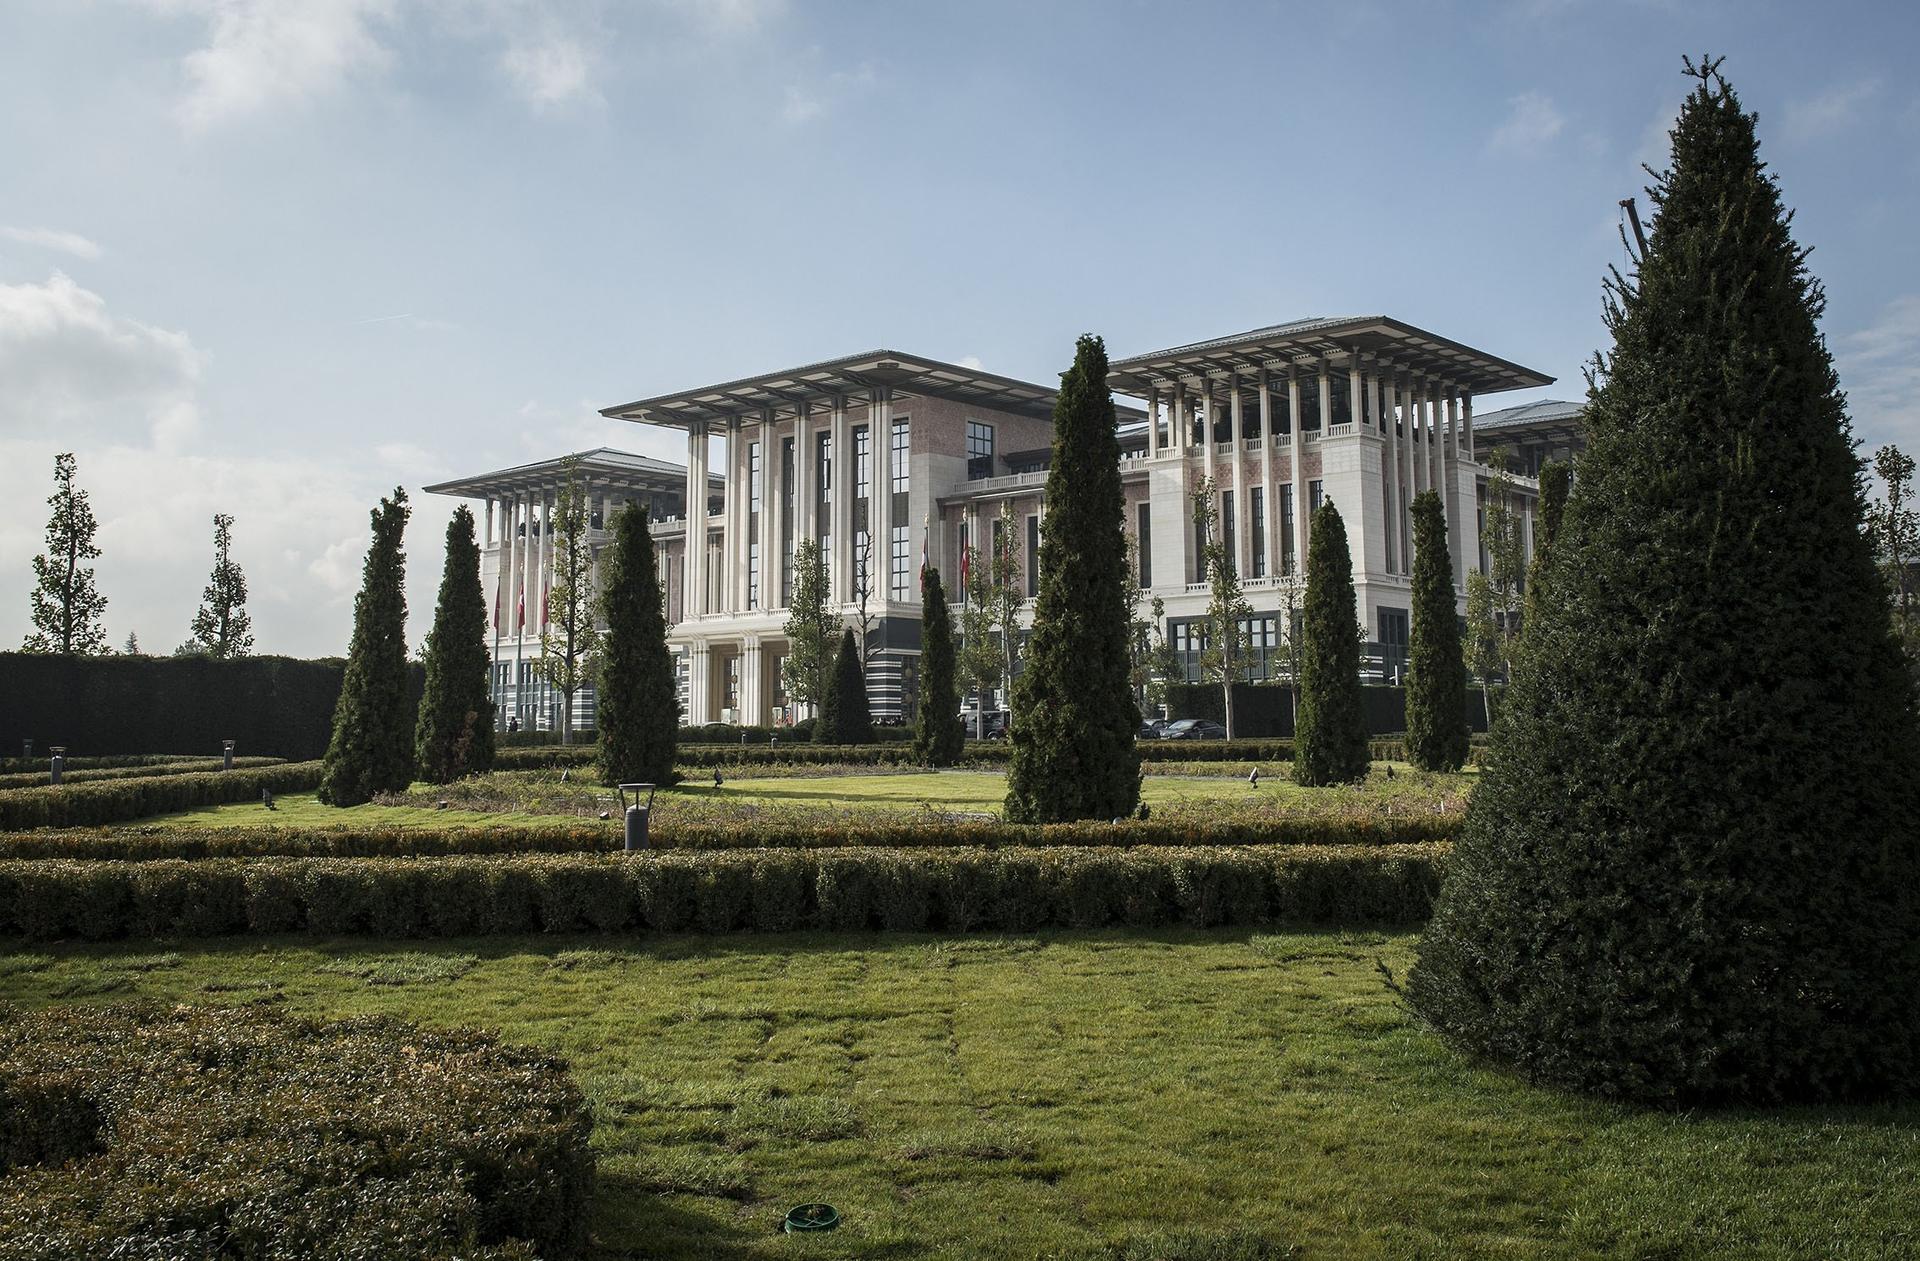 Exterior view of the "White Palace" in Ankara, Turkey.